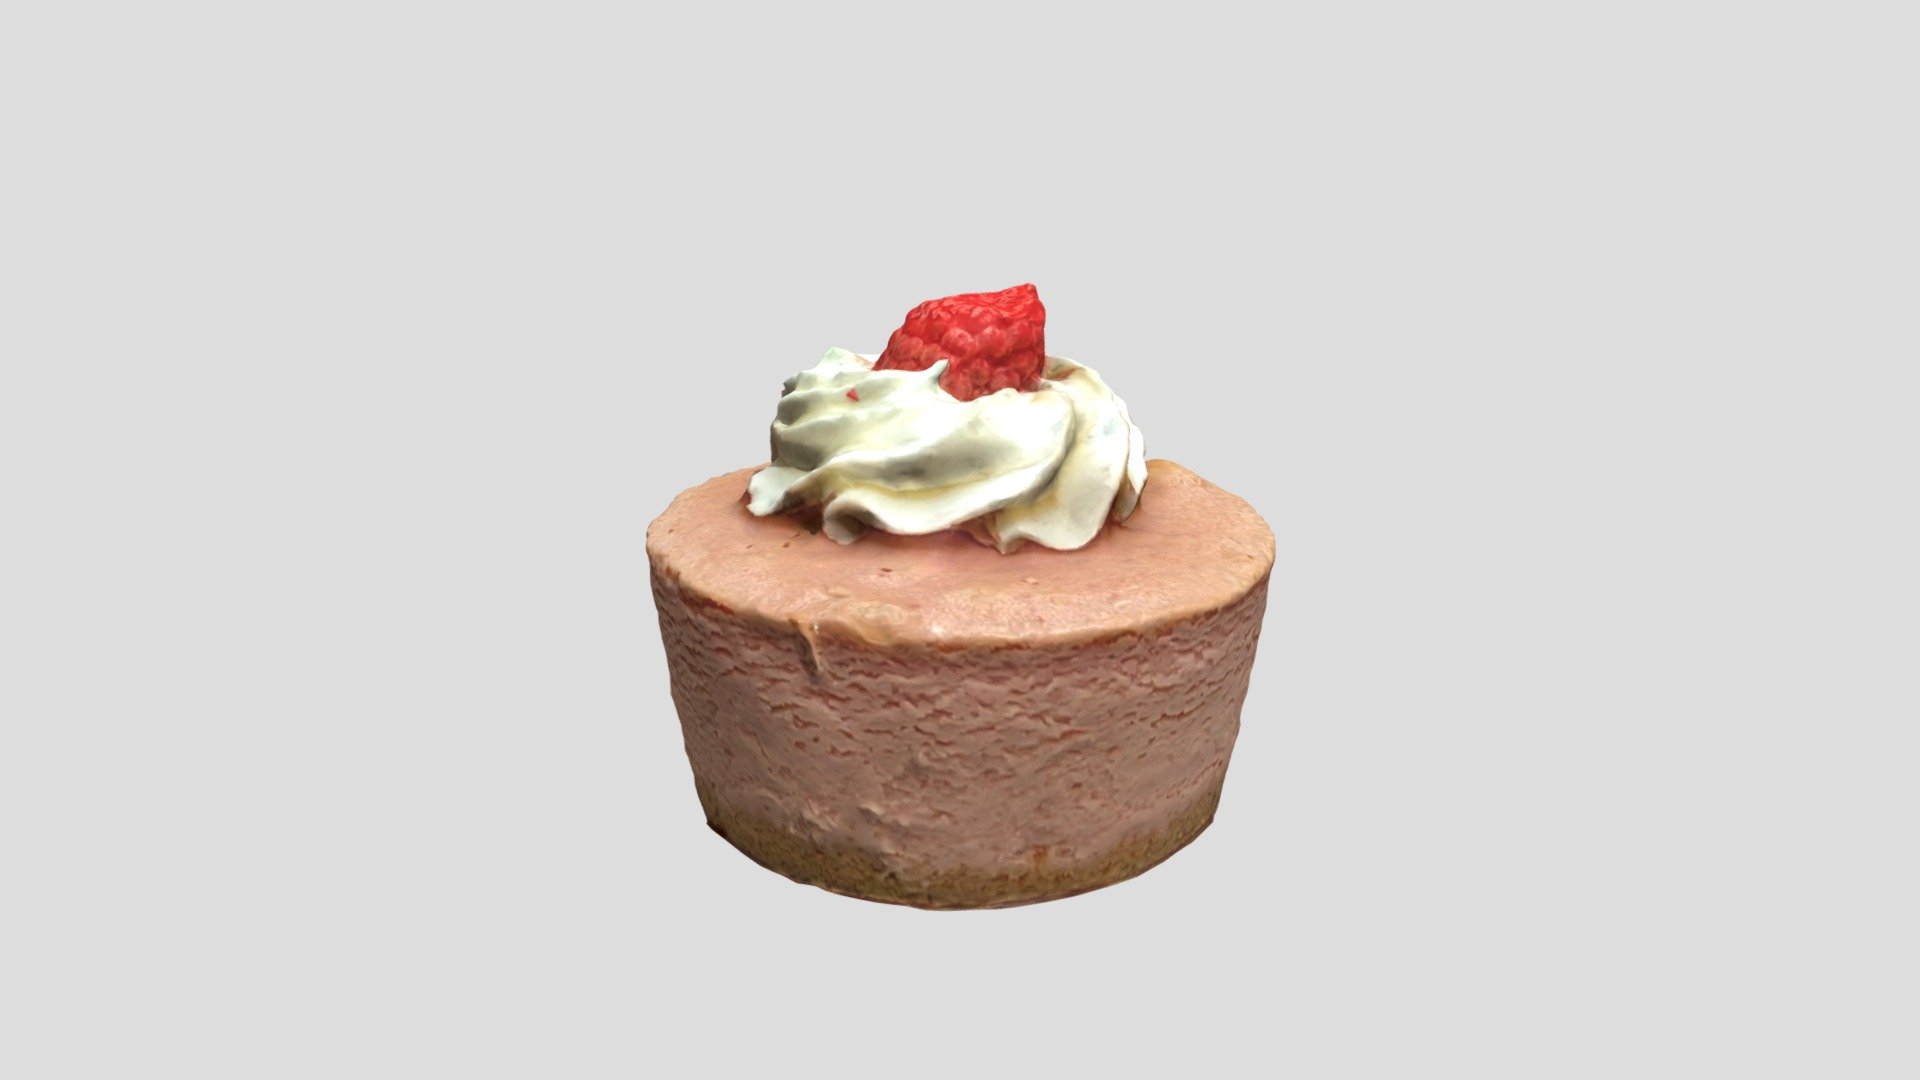 Cheesecake with Rassberry and whipcream. Delicious!
It's an AR object, so put it on your own dinning table 3d model